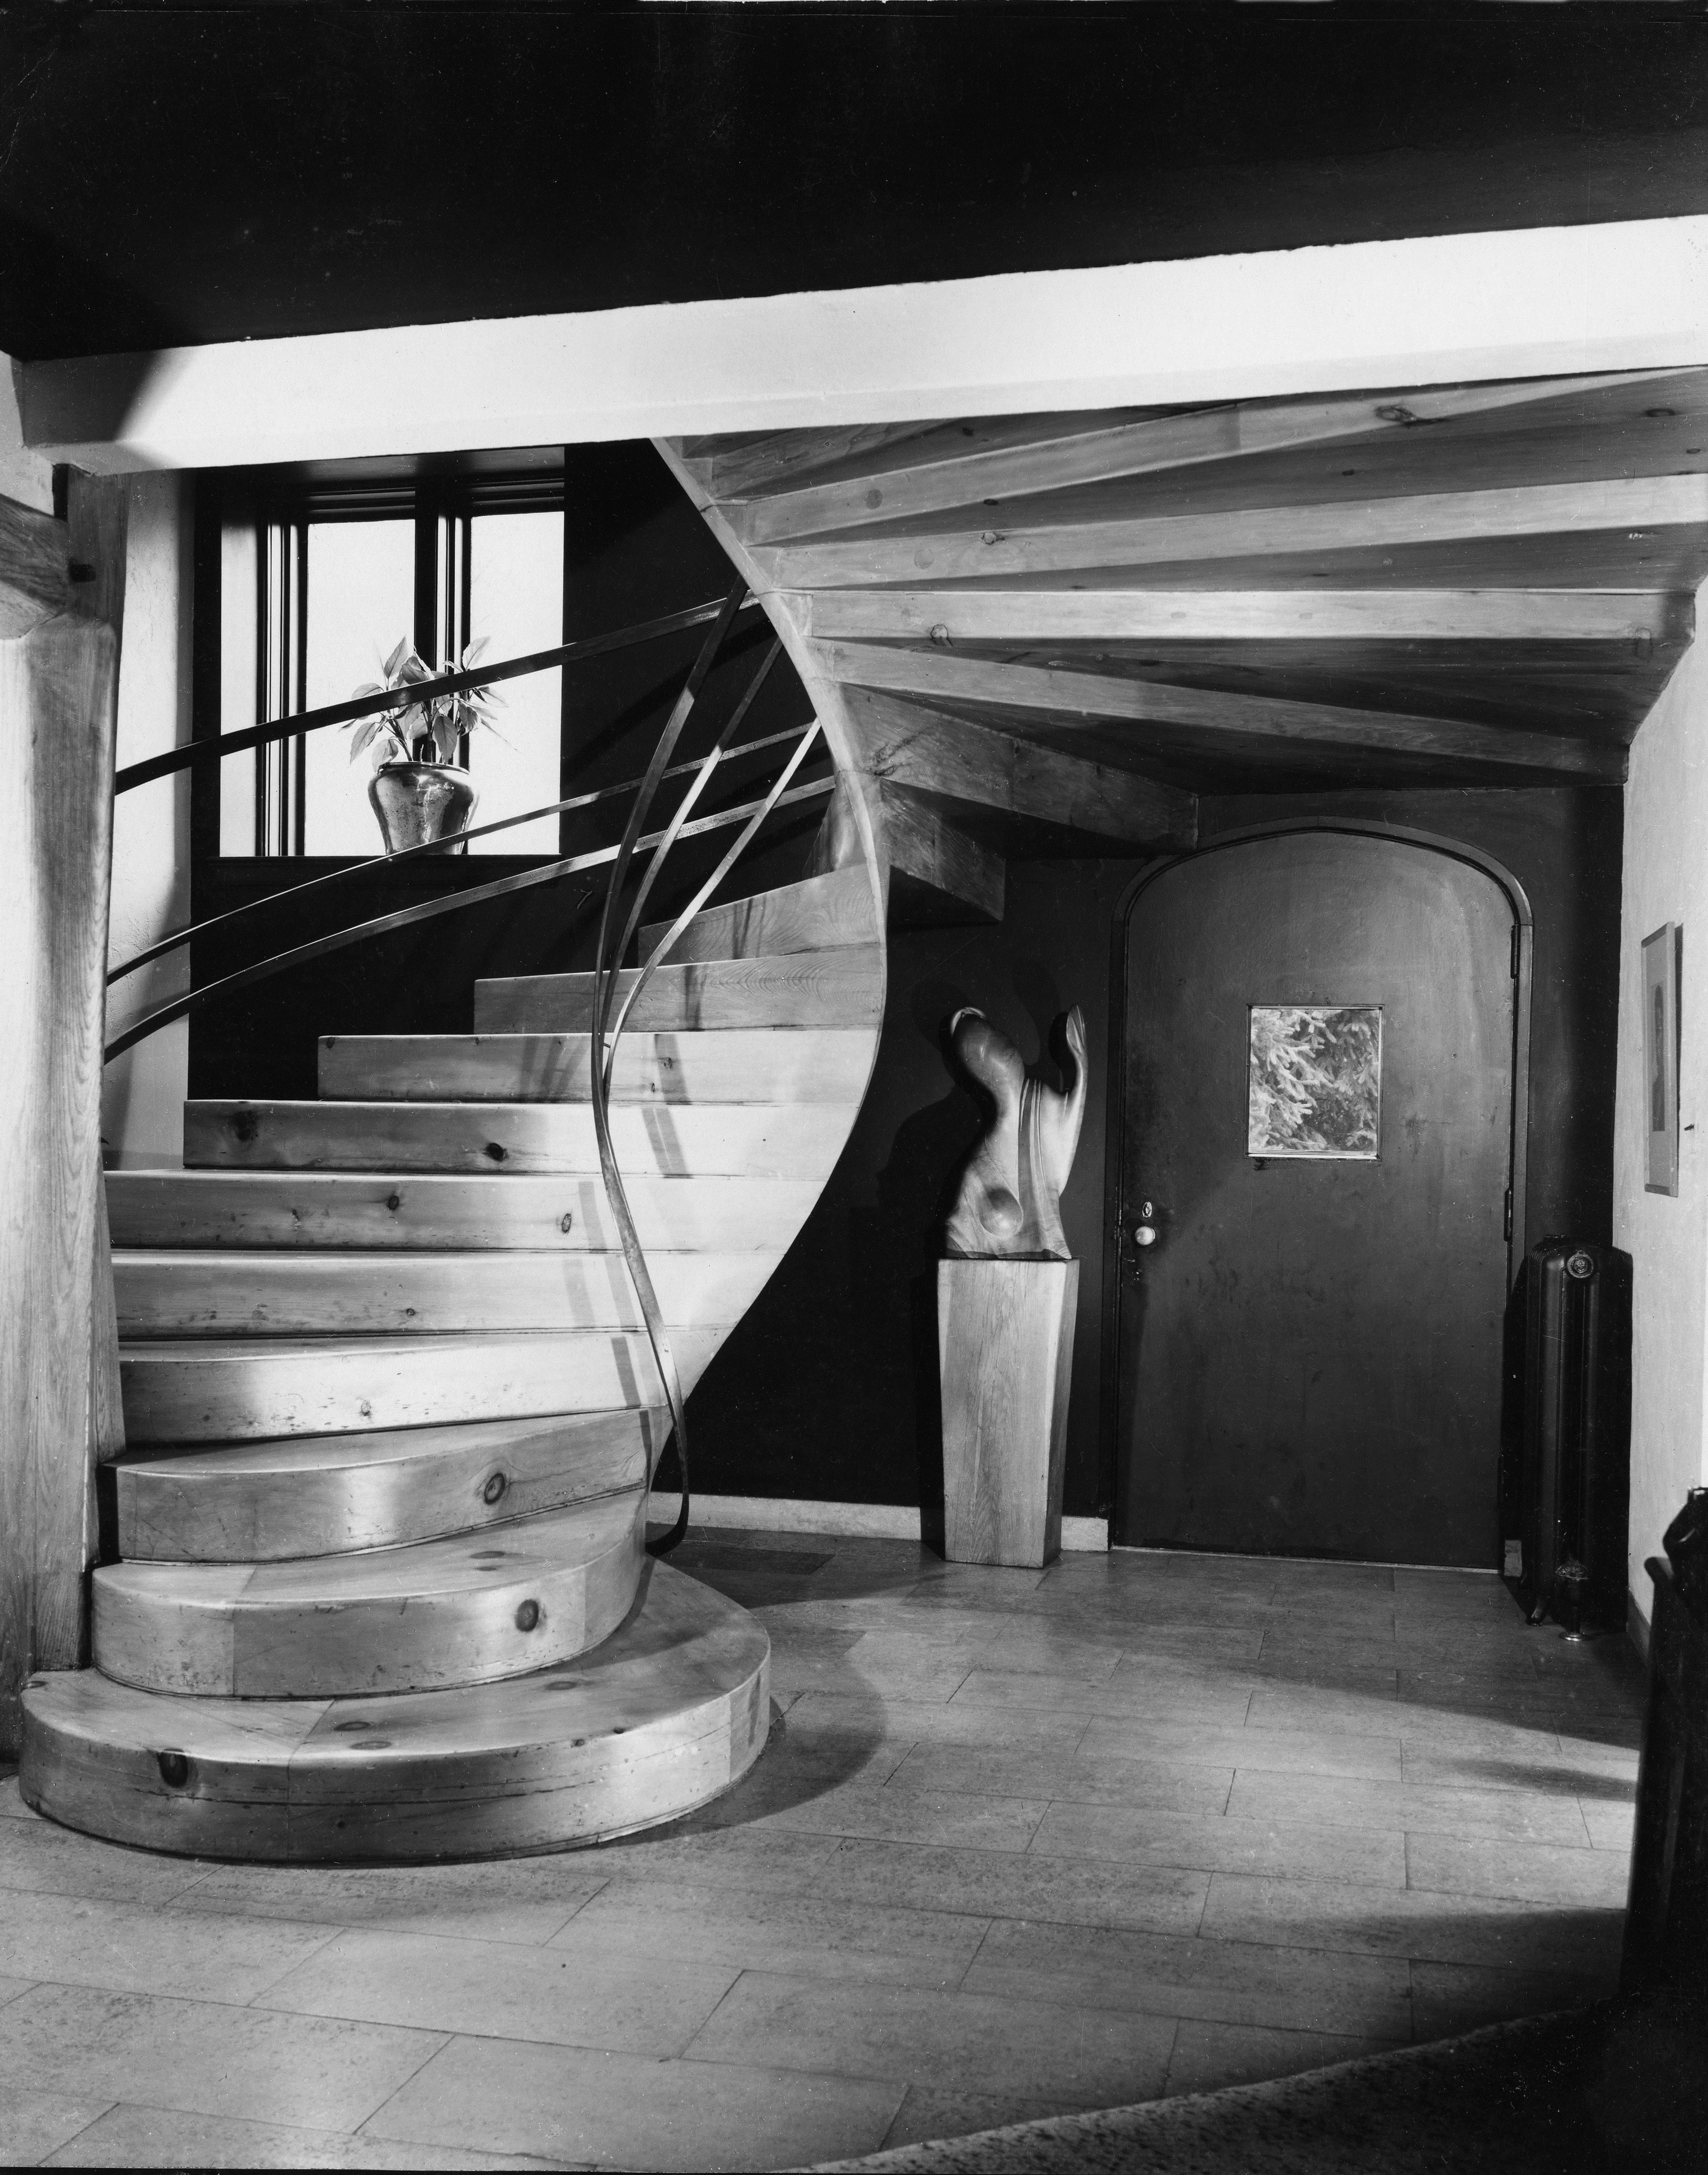 Wharton Esherick, Bok House Spiral Staircase, 1938. Compare with the Bauhaus Foyer, below to the right. Also shown: The Actress, 1938, center of photo.